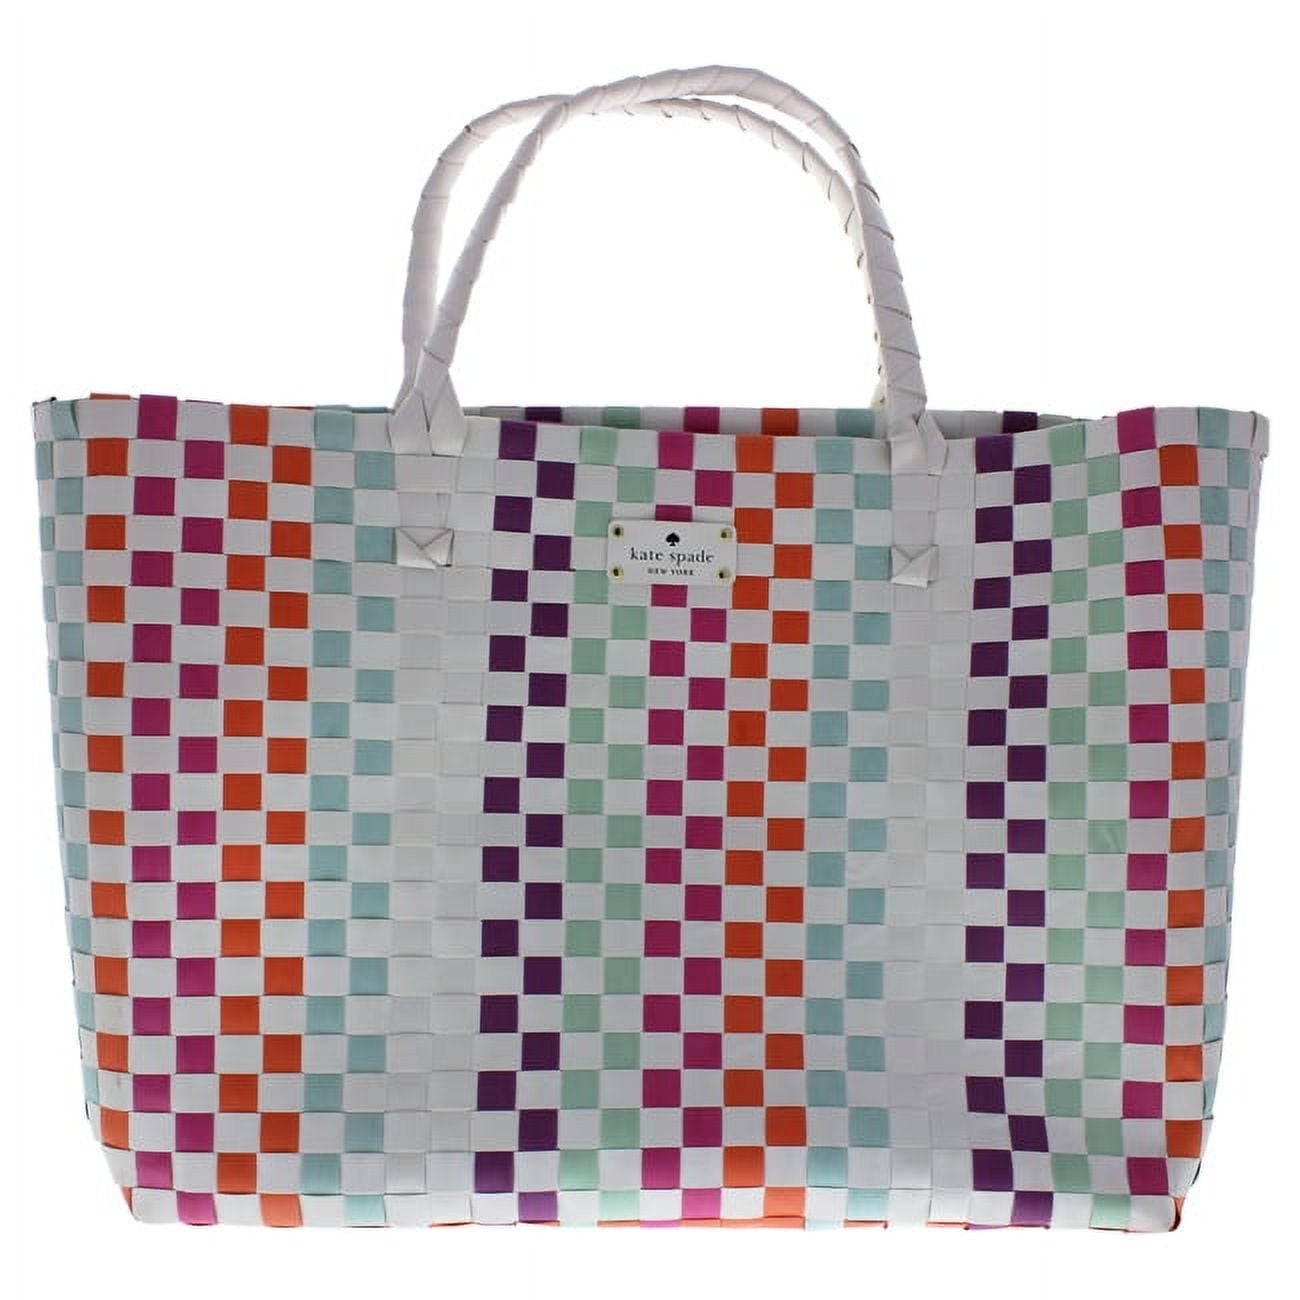 GWP Tote Bag - Multicolor by Kate Spade for Women - 1 Pc Bag